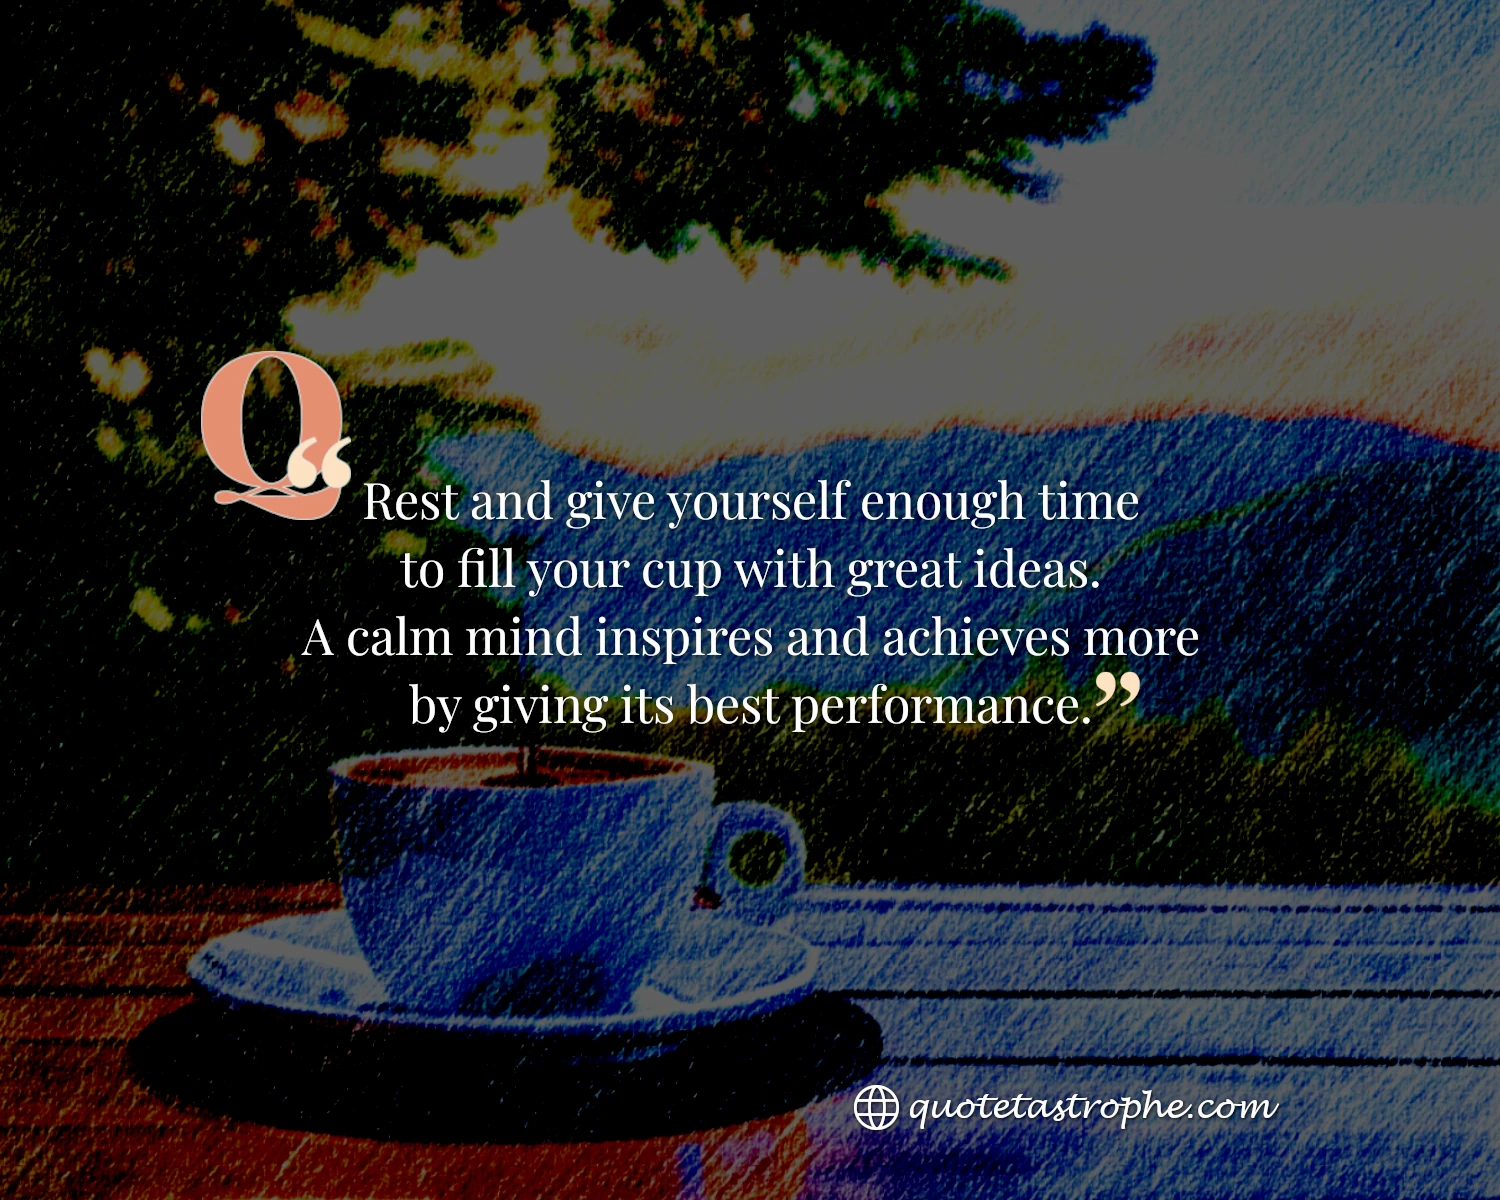 Rest to Give Yourself Enough Time To Fill Cup With Ideas